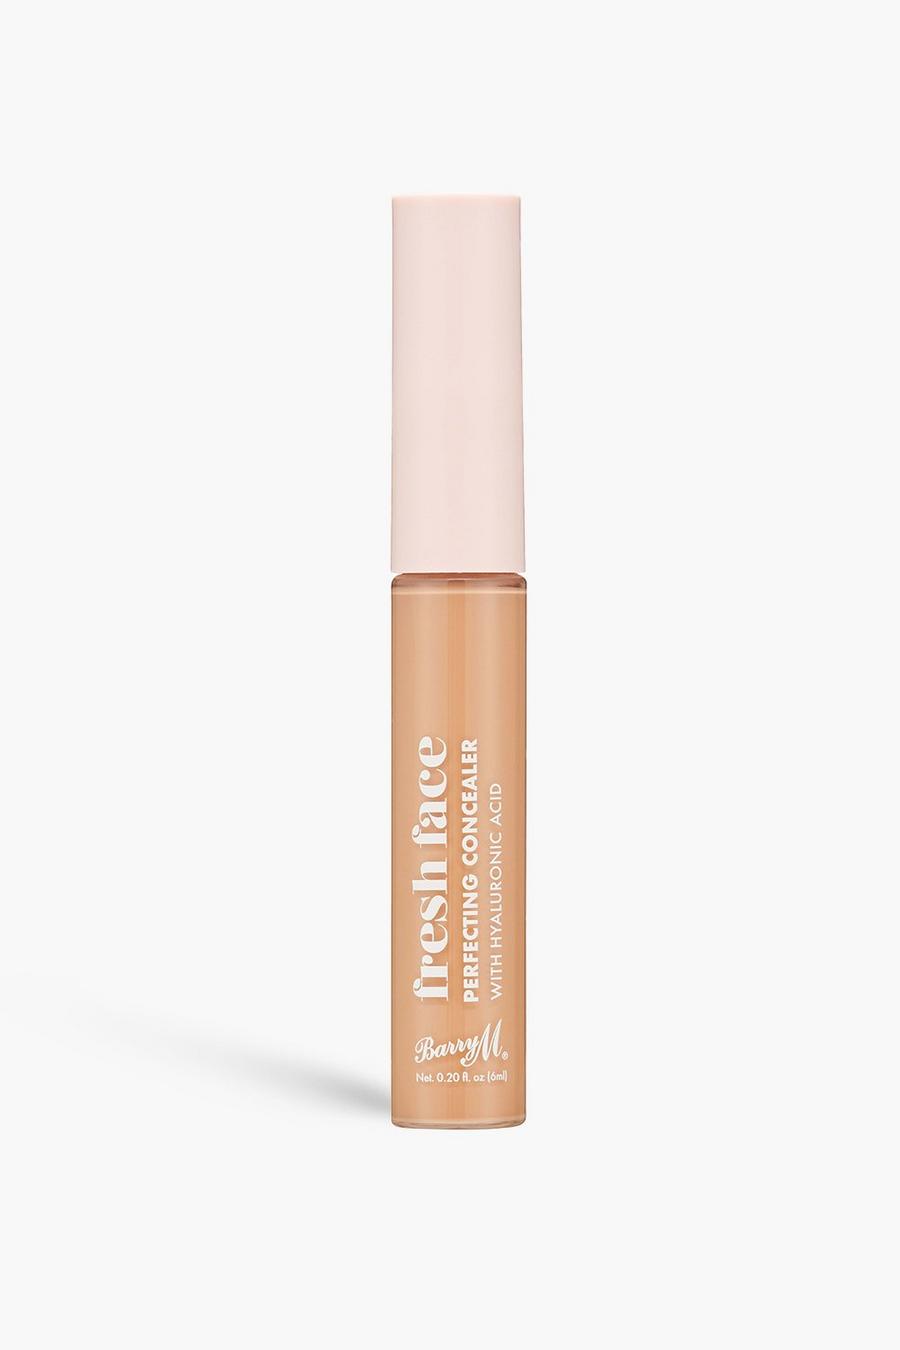 Tan marron Barry M Fresh Face Perfecting Concealer 5